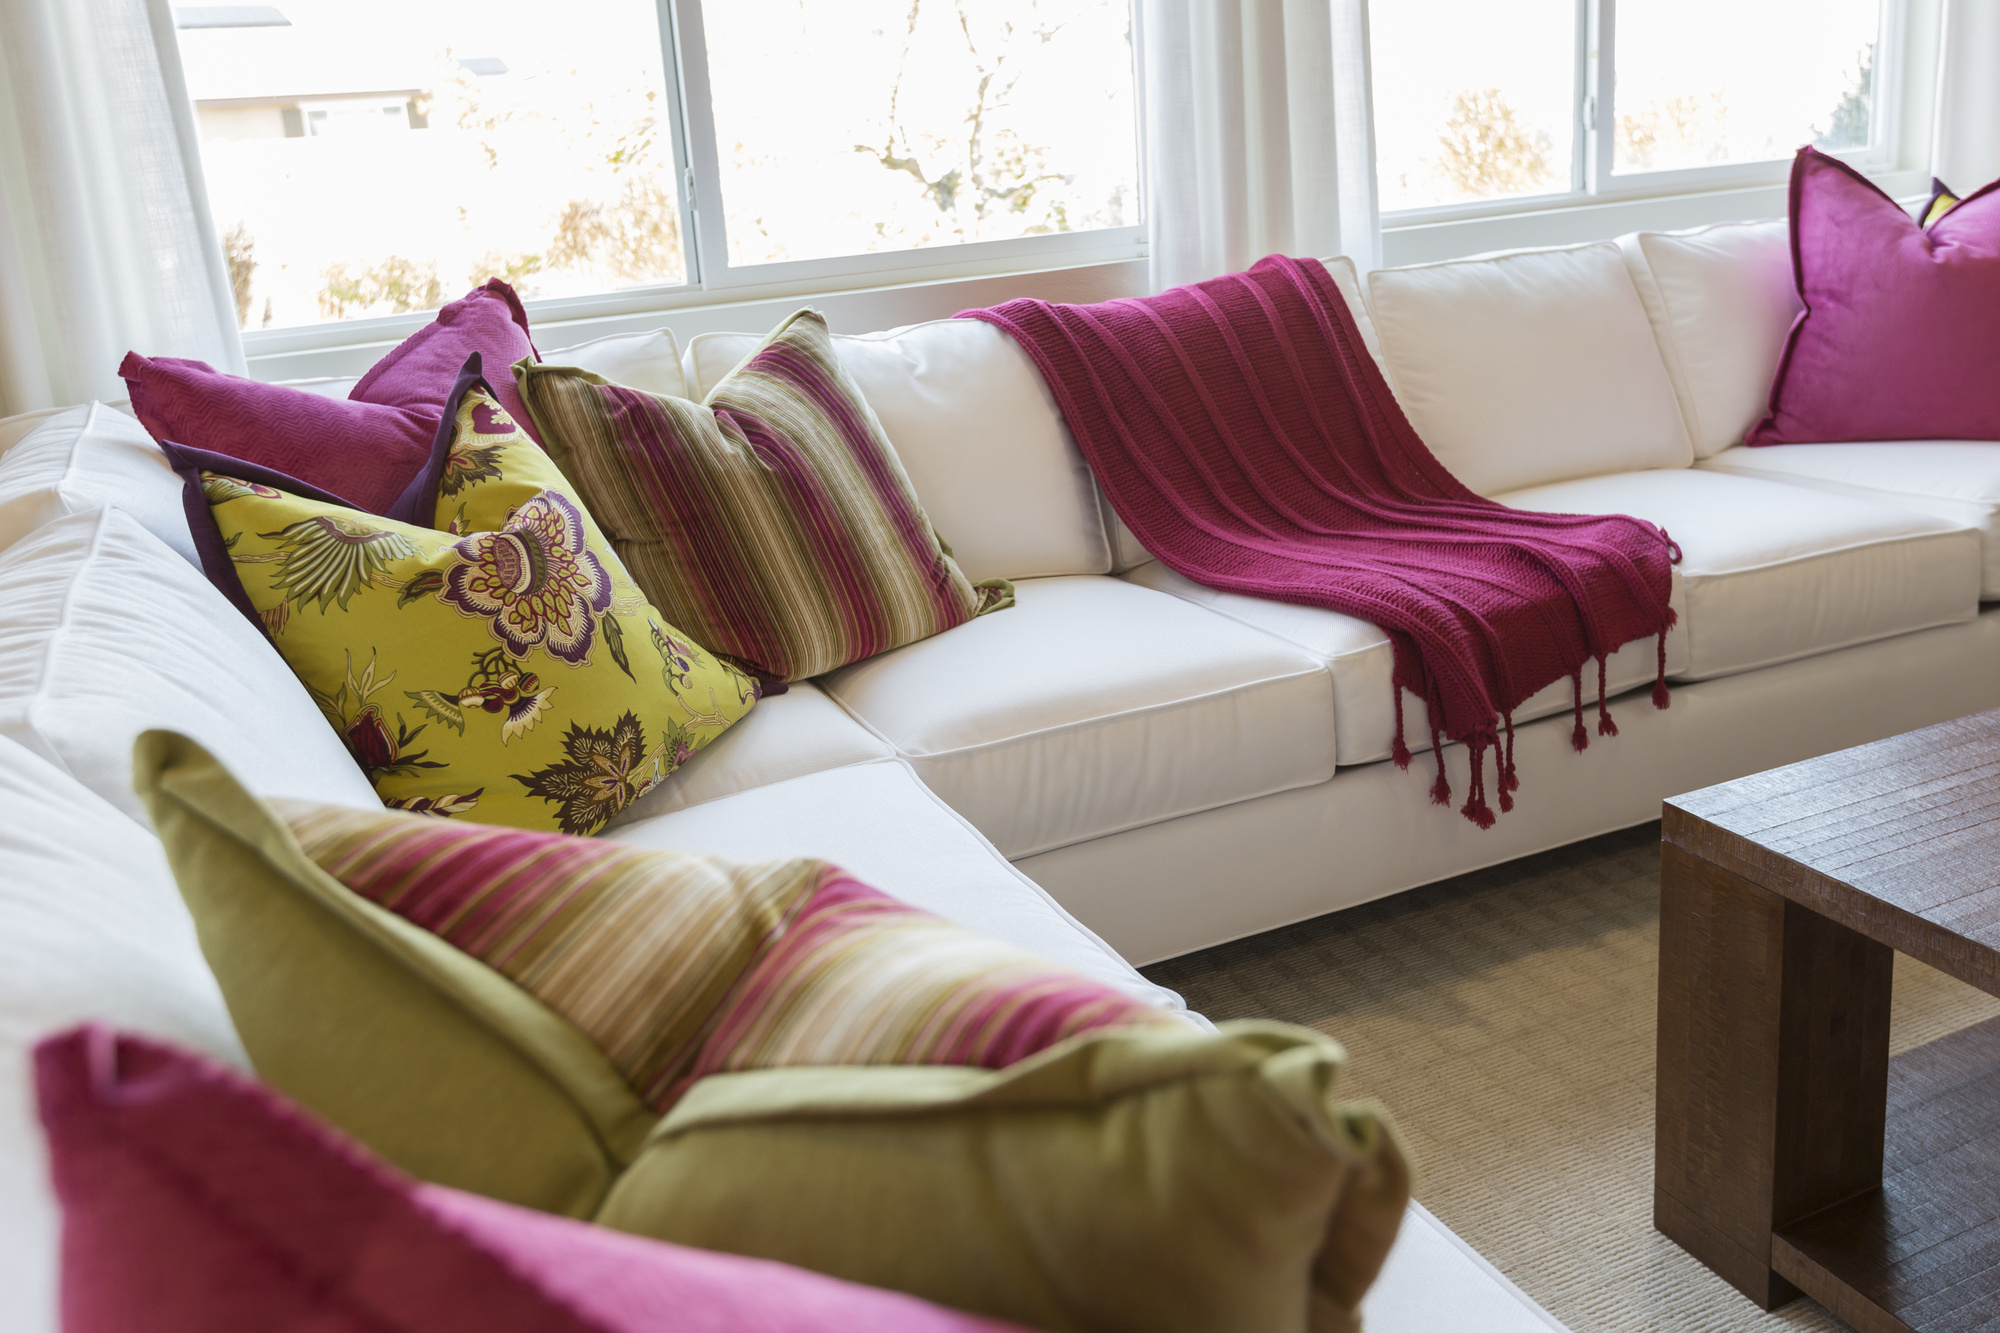 With more time spent at home, sofa trends have shifted to reflect this change in use. We look at the trends shaping our lounge spaces.